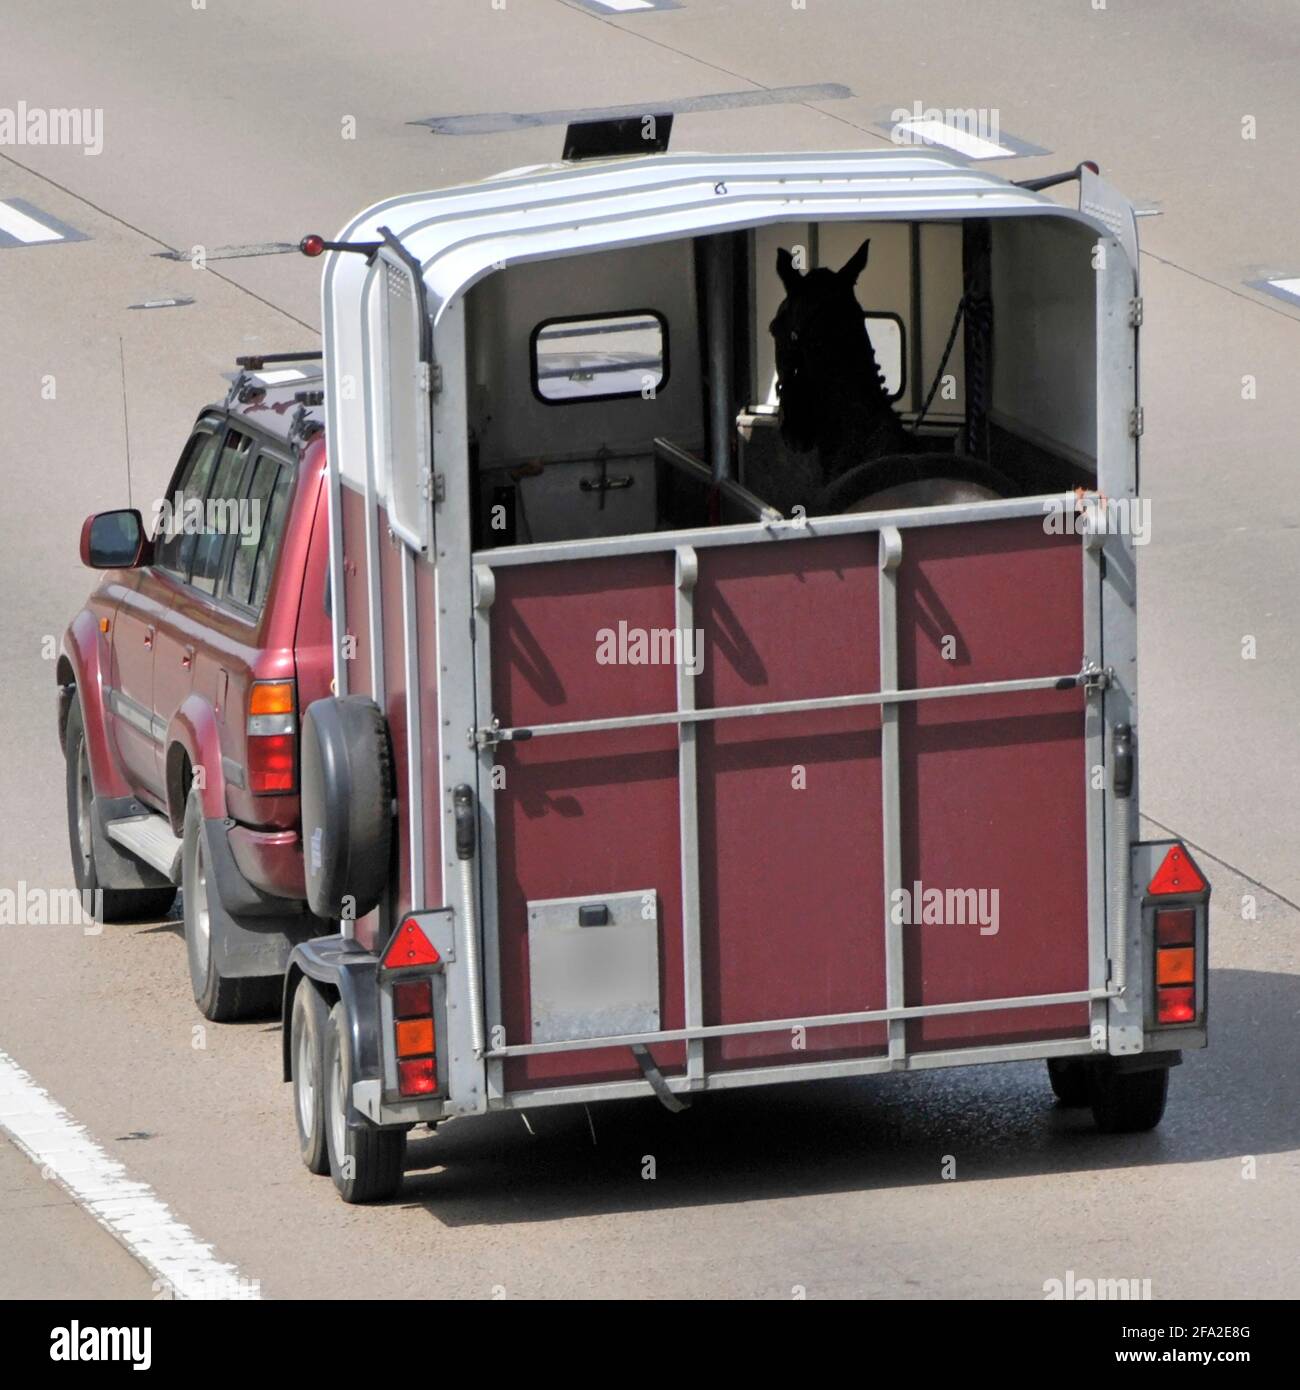 Back view of open back above tail gate image of horse inside a two berth horse box trailer transport car towing & driving along UK motorway England Stock Photo